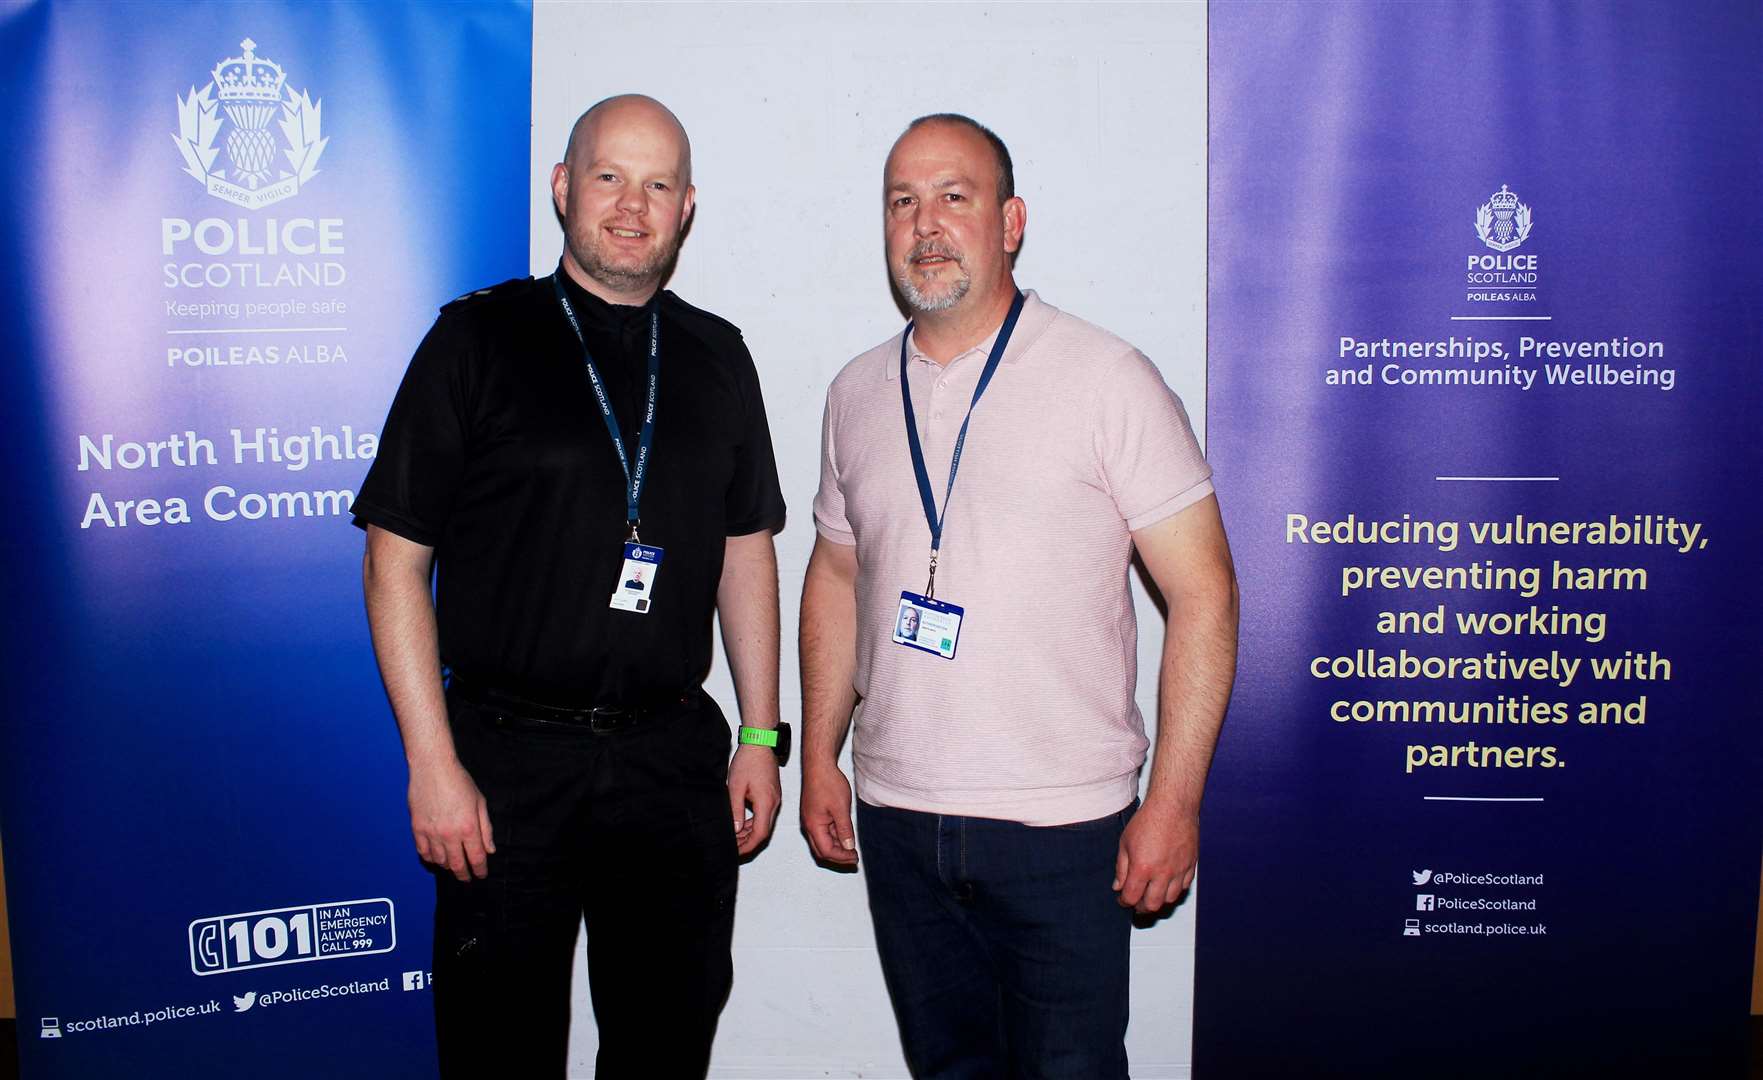 Inspector Stephen Mezals, Police Scotland's area inspector for Caithness, and Martin Smith, strategy and research lead for the Scottish Police Authority, at an event in the Pulteney Centre last July. Picture: Alan Hendry